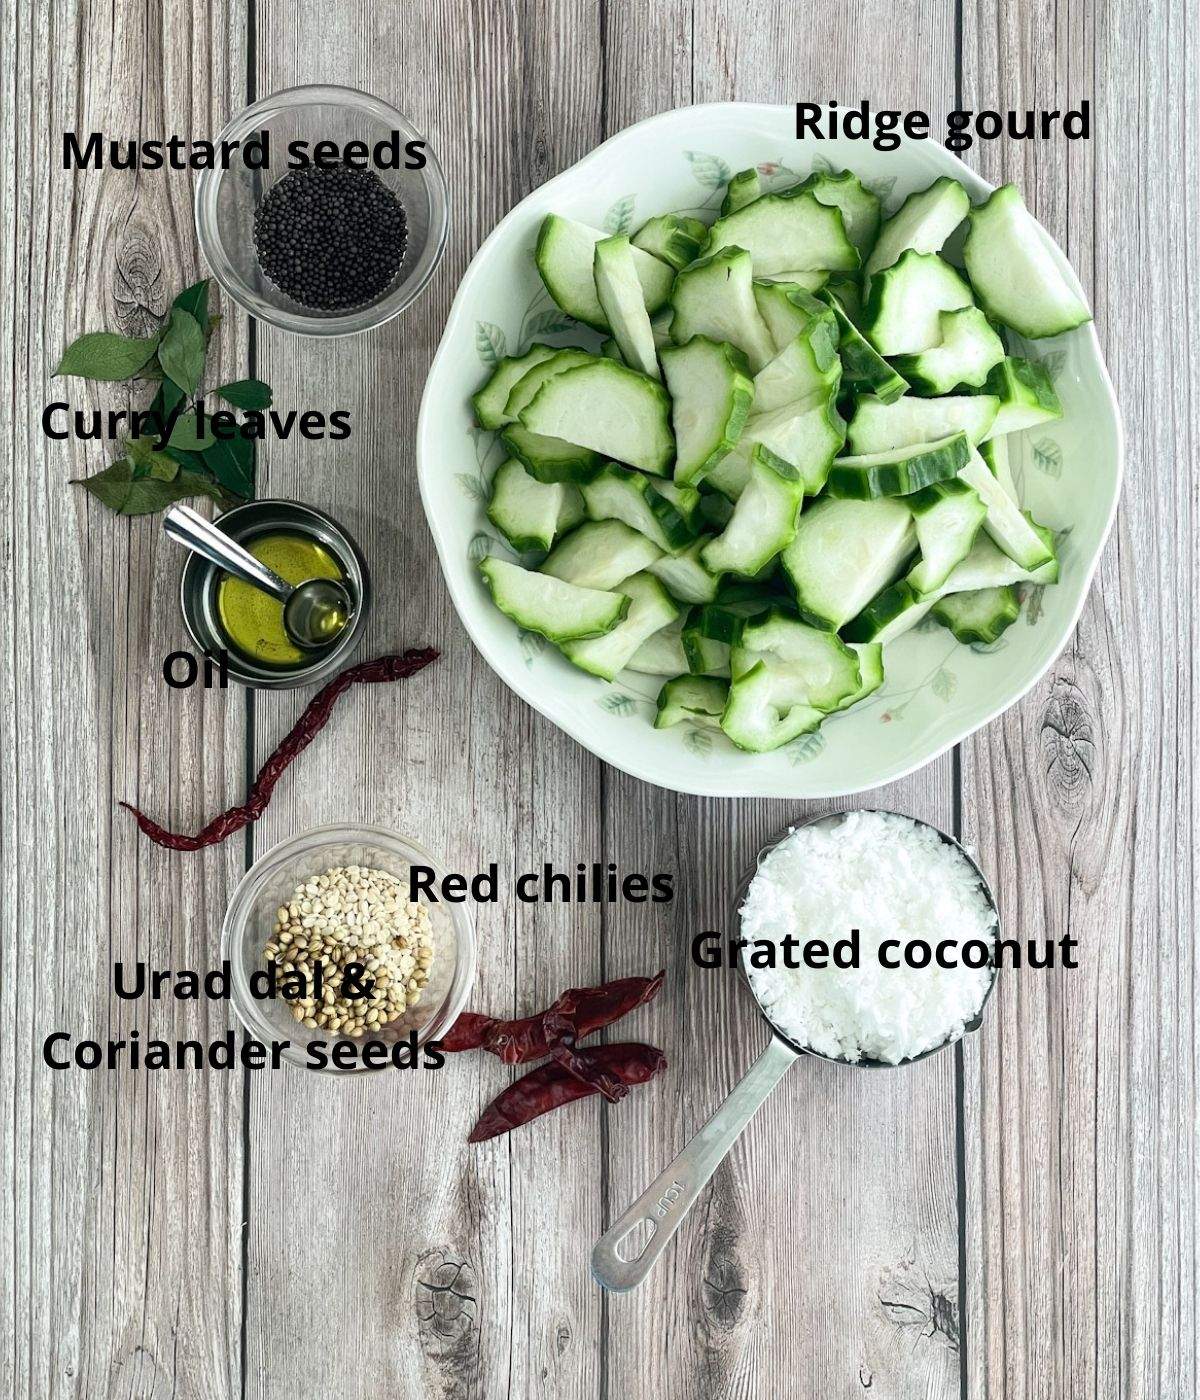 A table is with all the ingredients for chutney like ridge gourd, coconuts, spices.